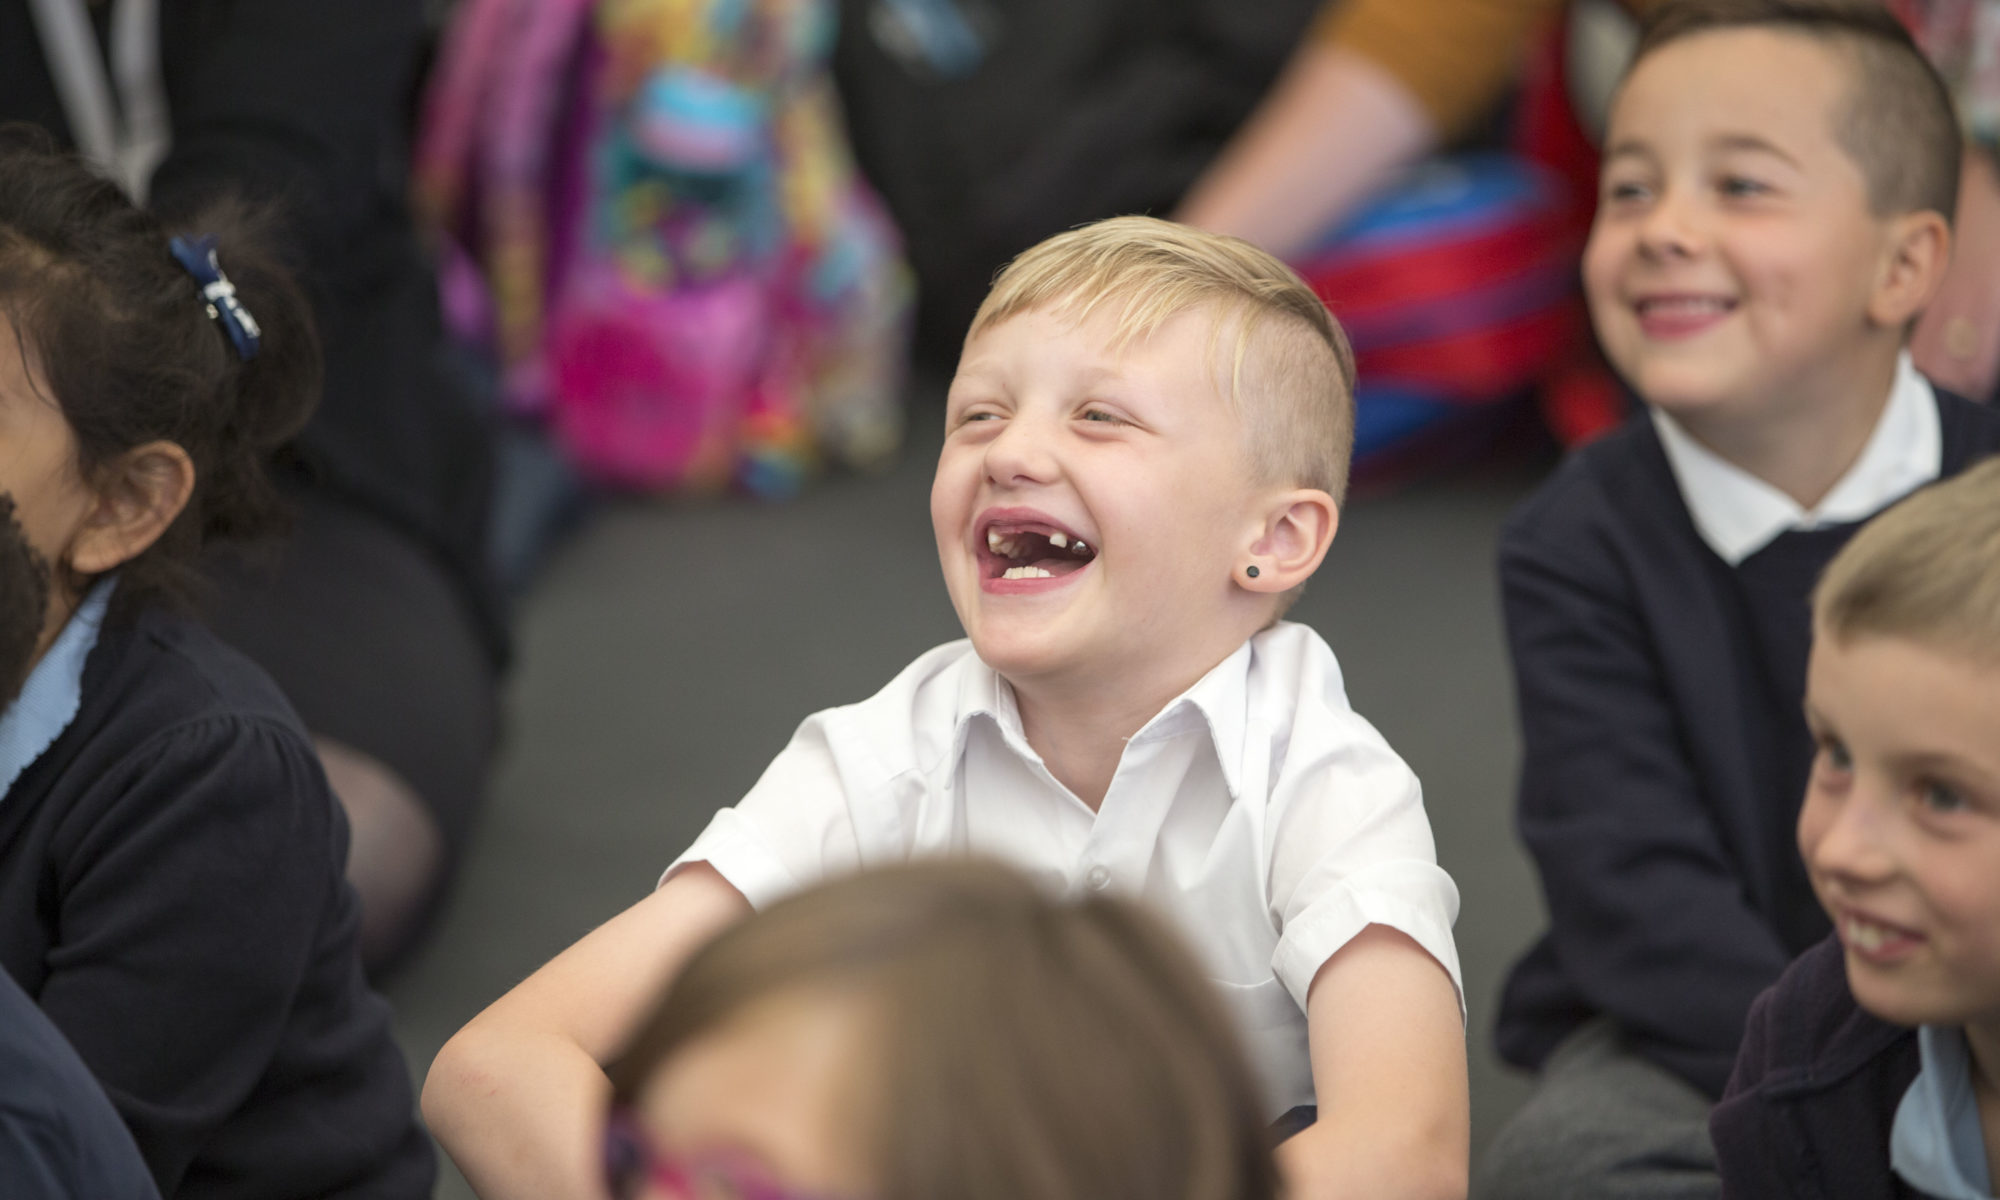 Boy laughing at a Book Festival event